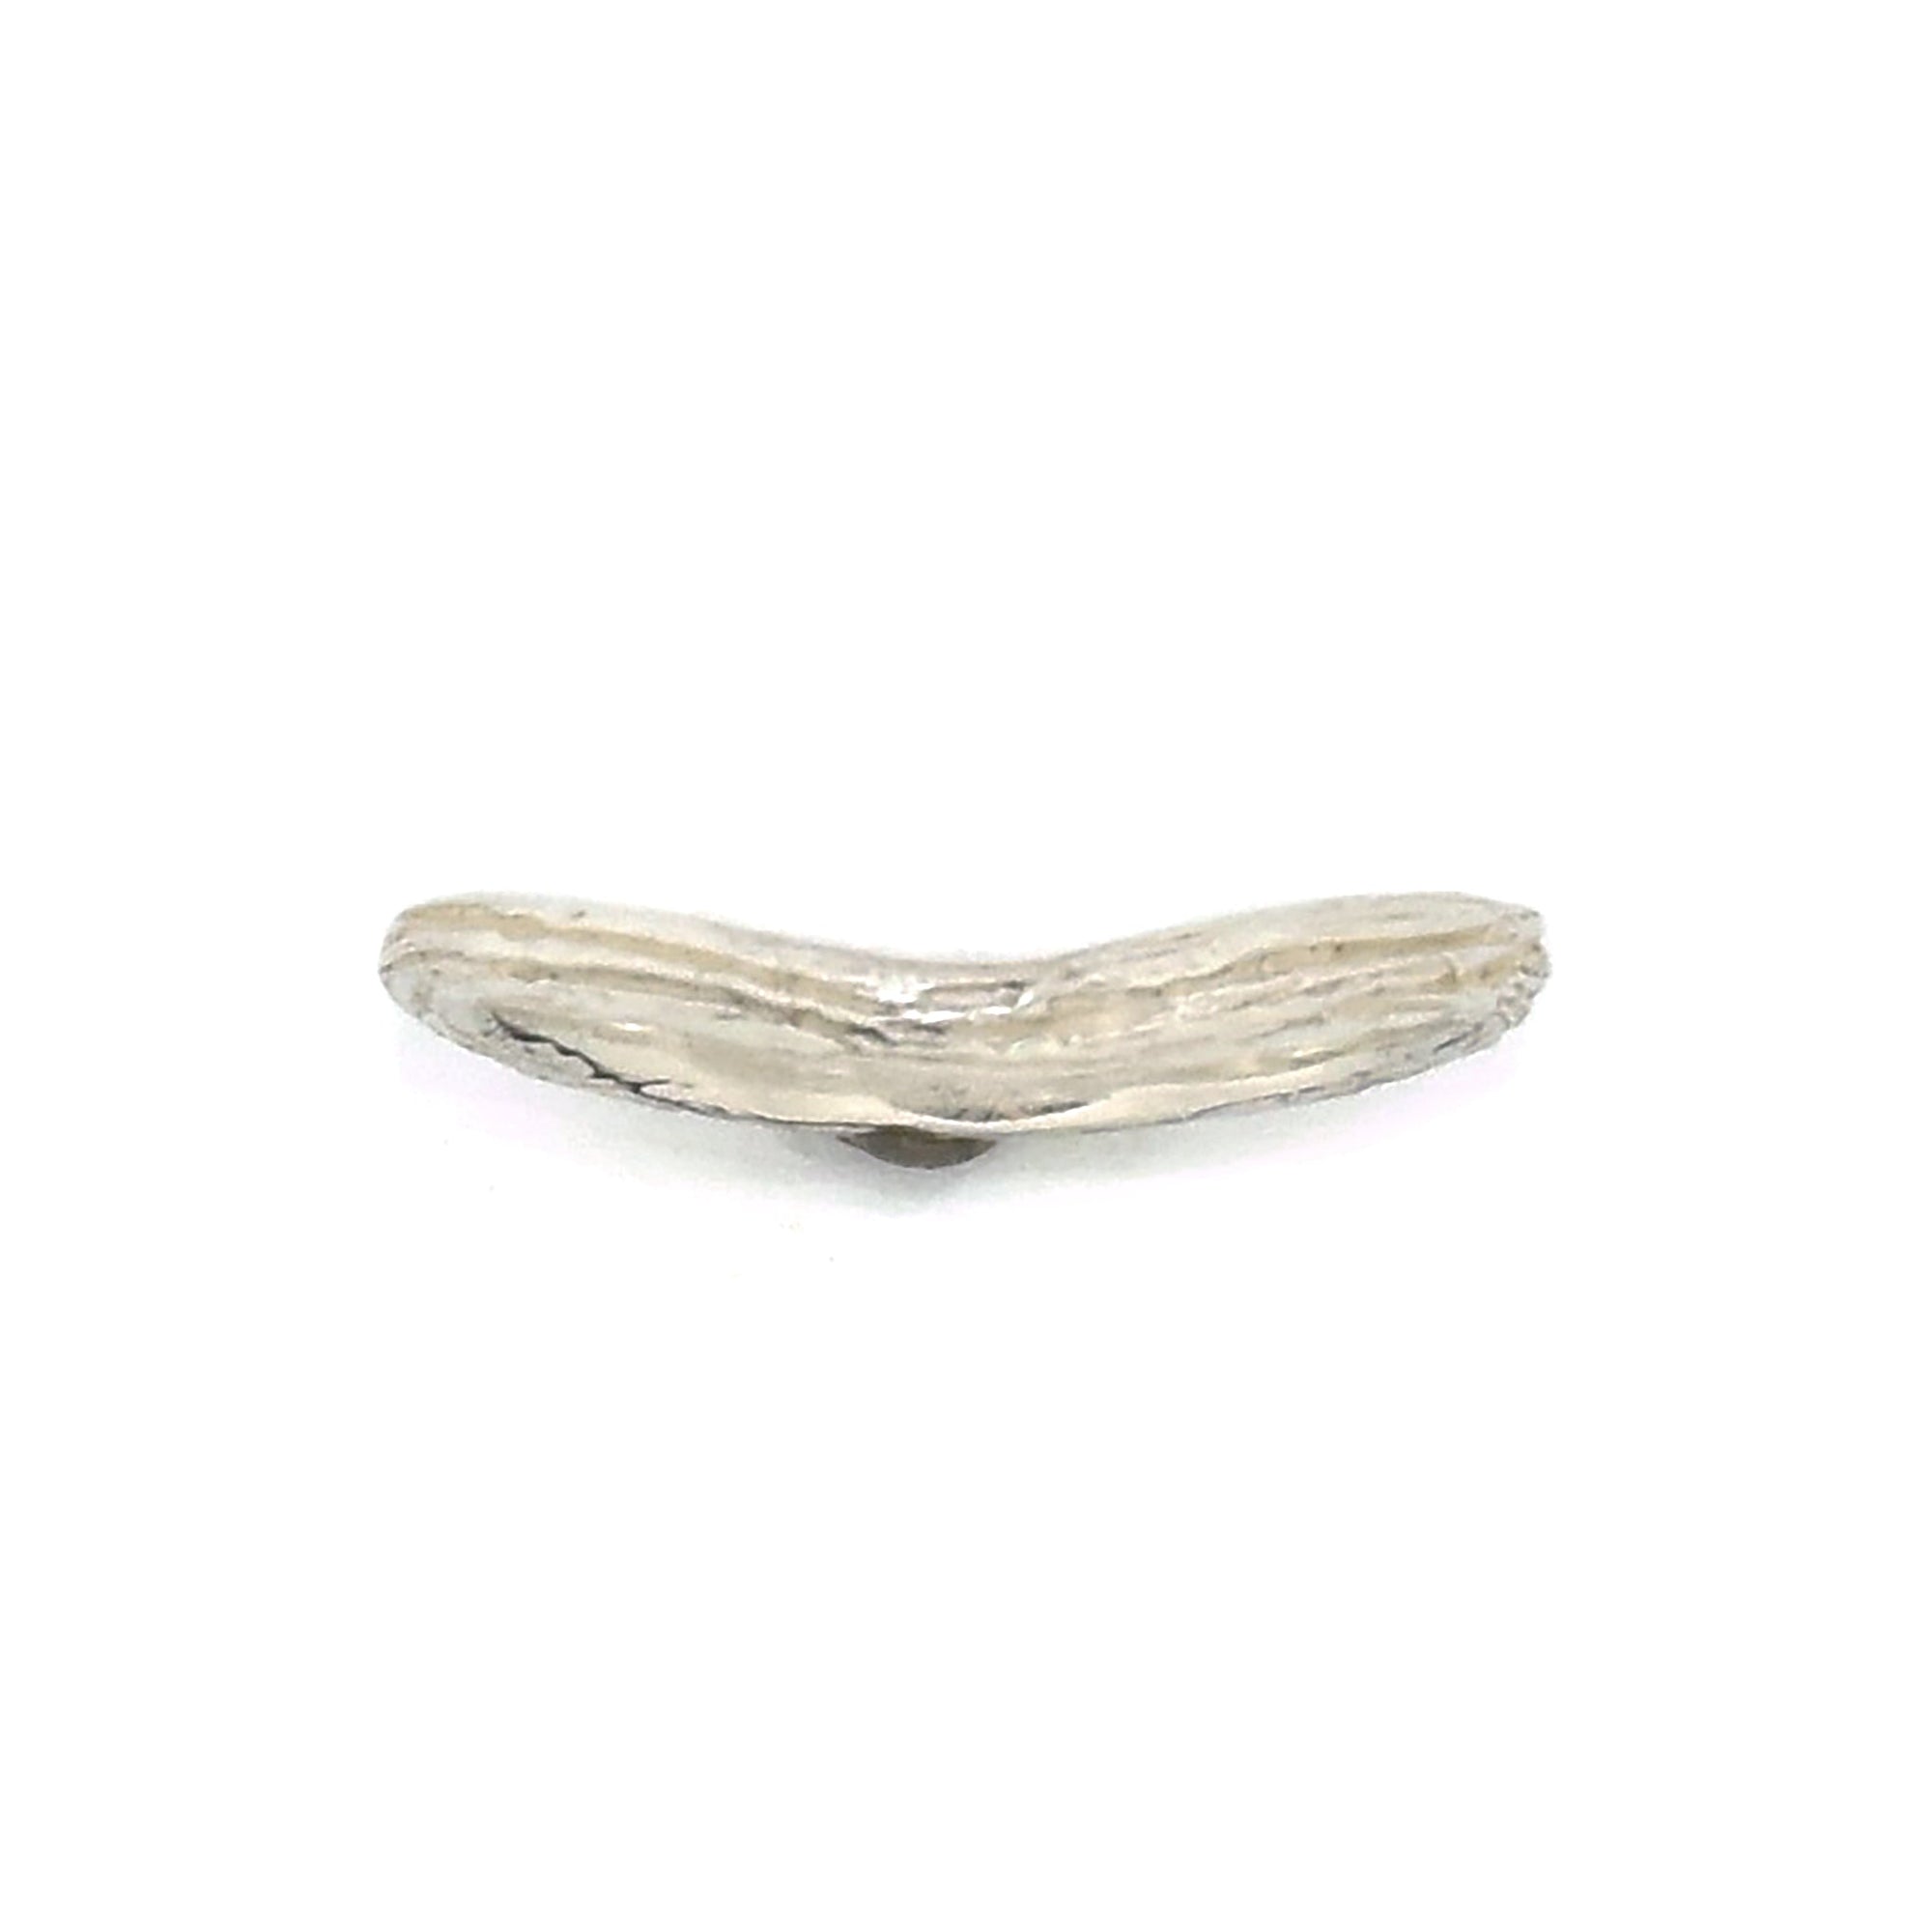 Gold Curved Twig Ring - your choice of gold - Wedding Ring  18K Palladium White Gold  14K Rose Gold 6350 - handmade by Beth Millner Jewelry